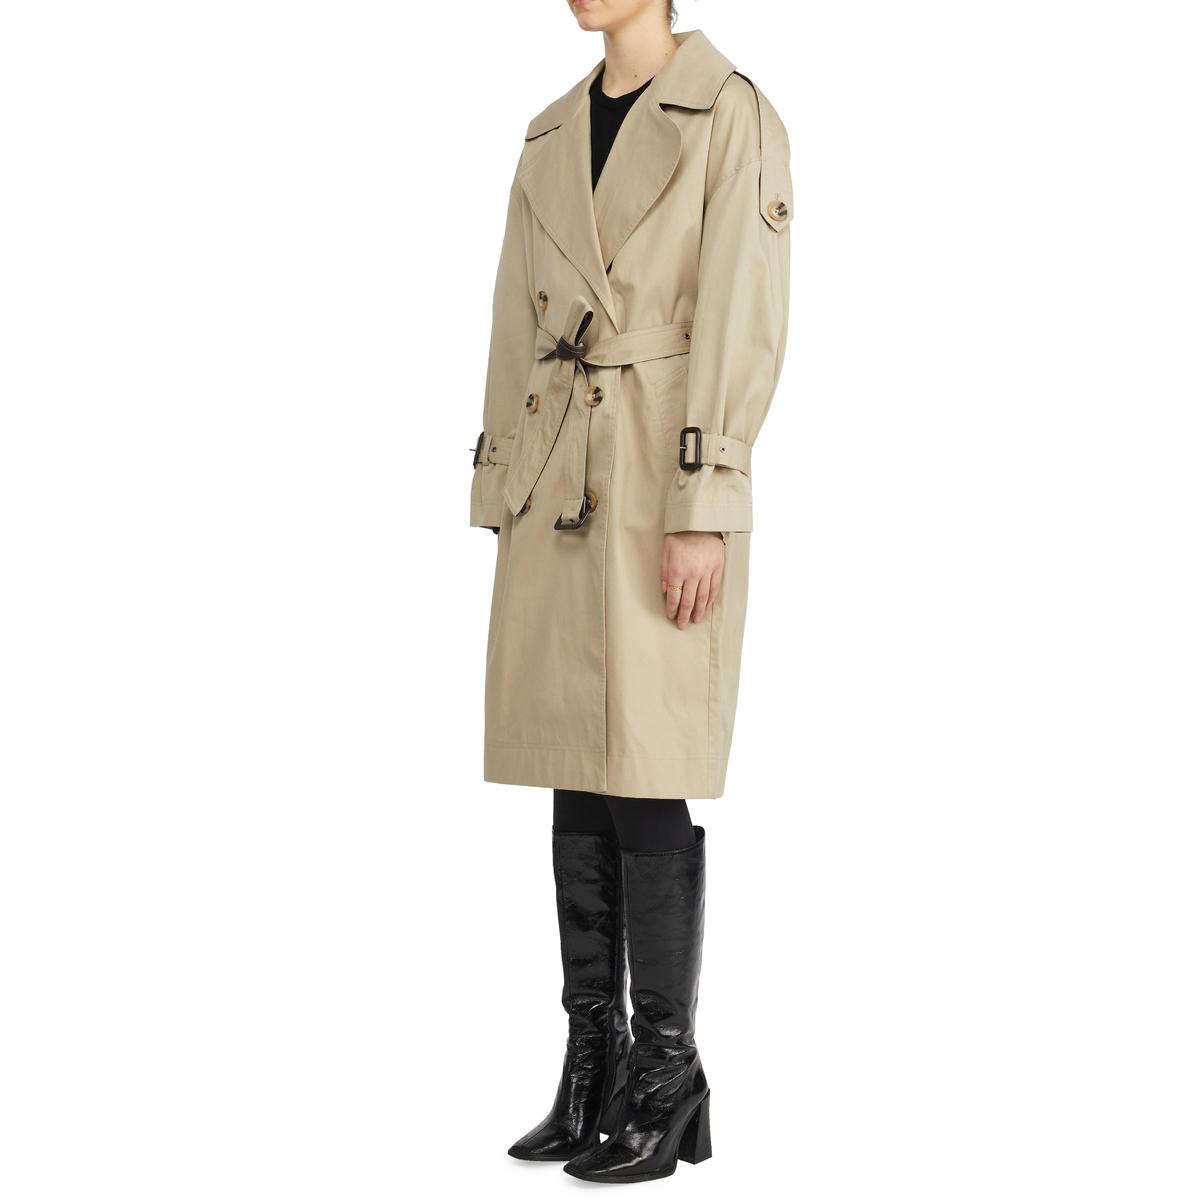 Badgley Mischka Women's Cotton Double Breasted Belted Trench Coat | eBay